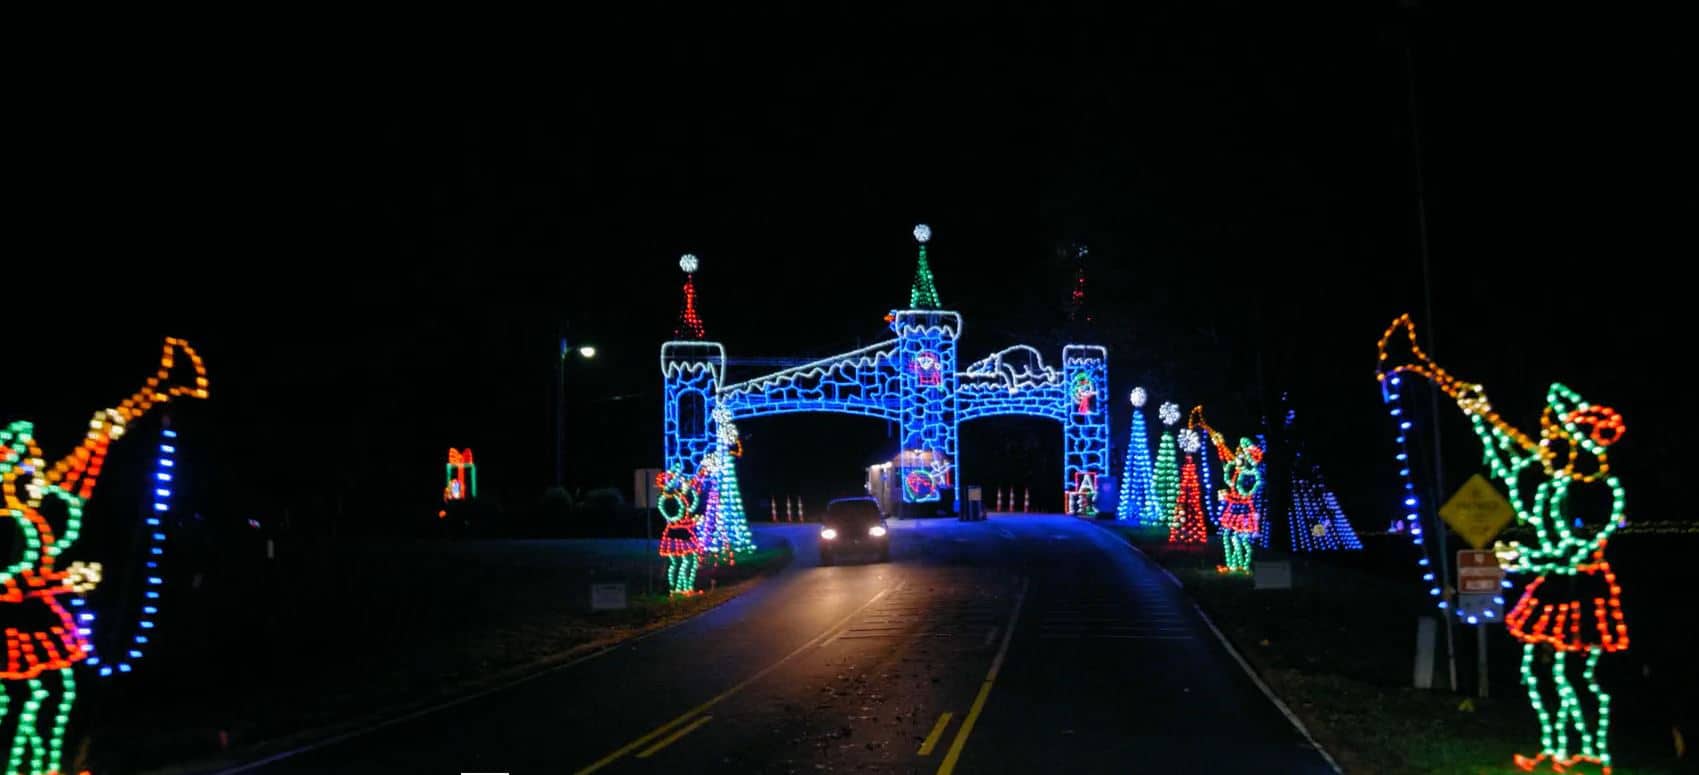 Lighted castle entrance spans the road at the Tanglewood Festival of Lights, one of the best Christmas lights in NC